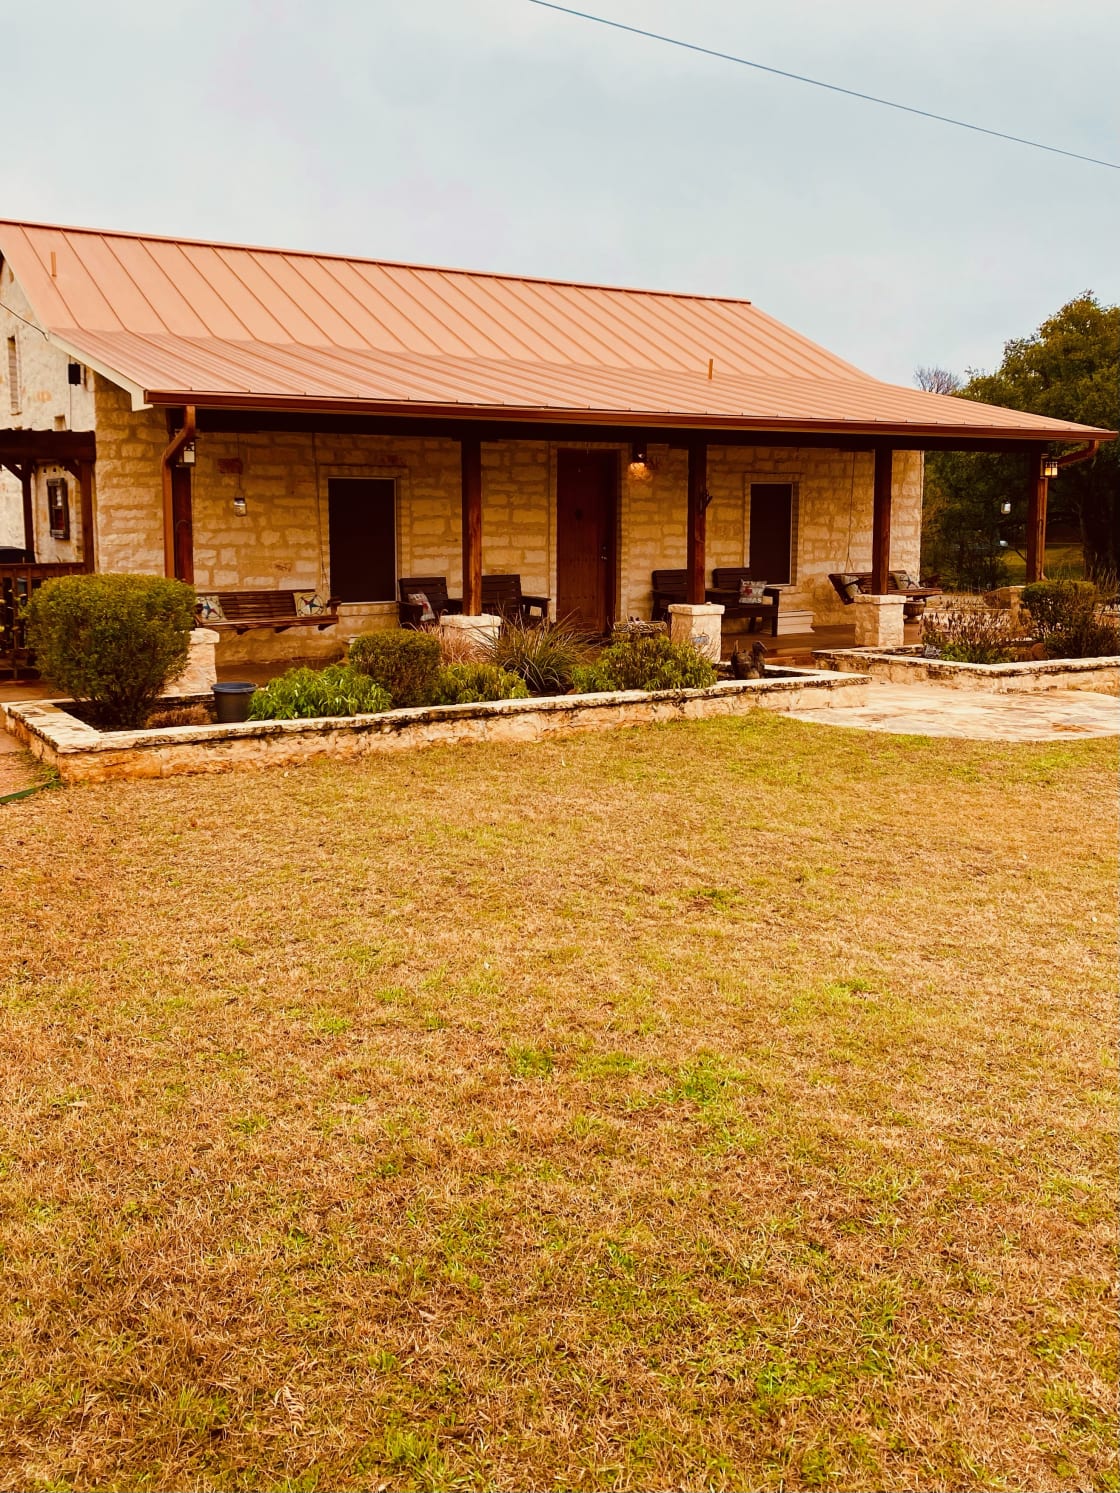 The Hill Country Compound